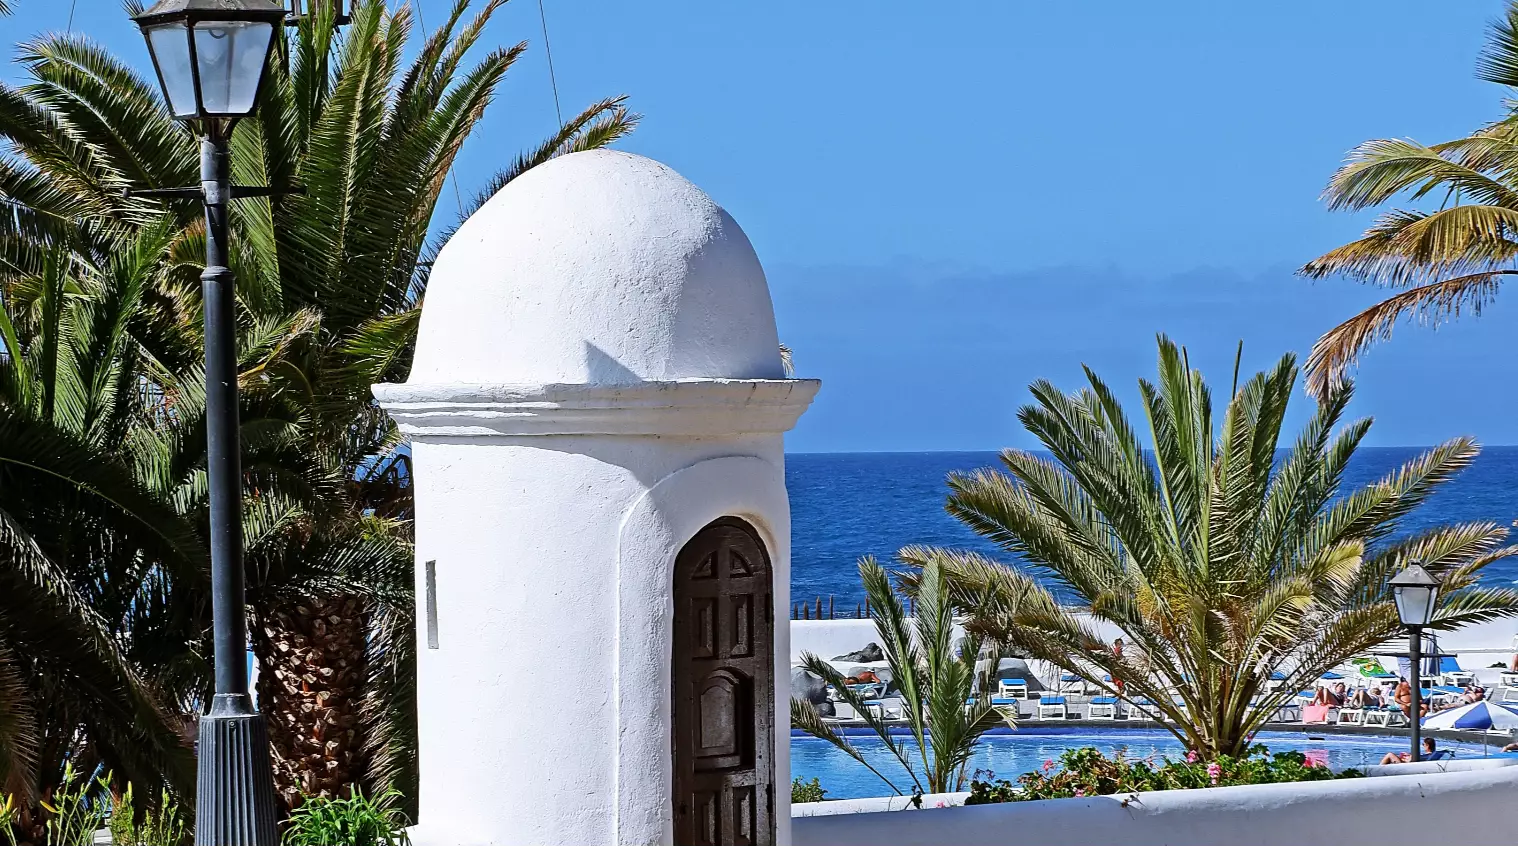 Canary Islands Not Due To Open To International Tourism Until October At The Earliest